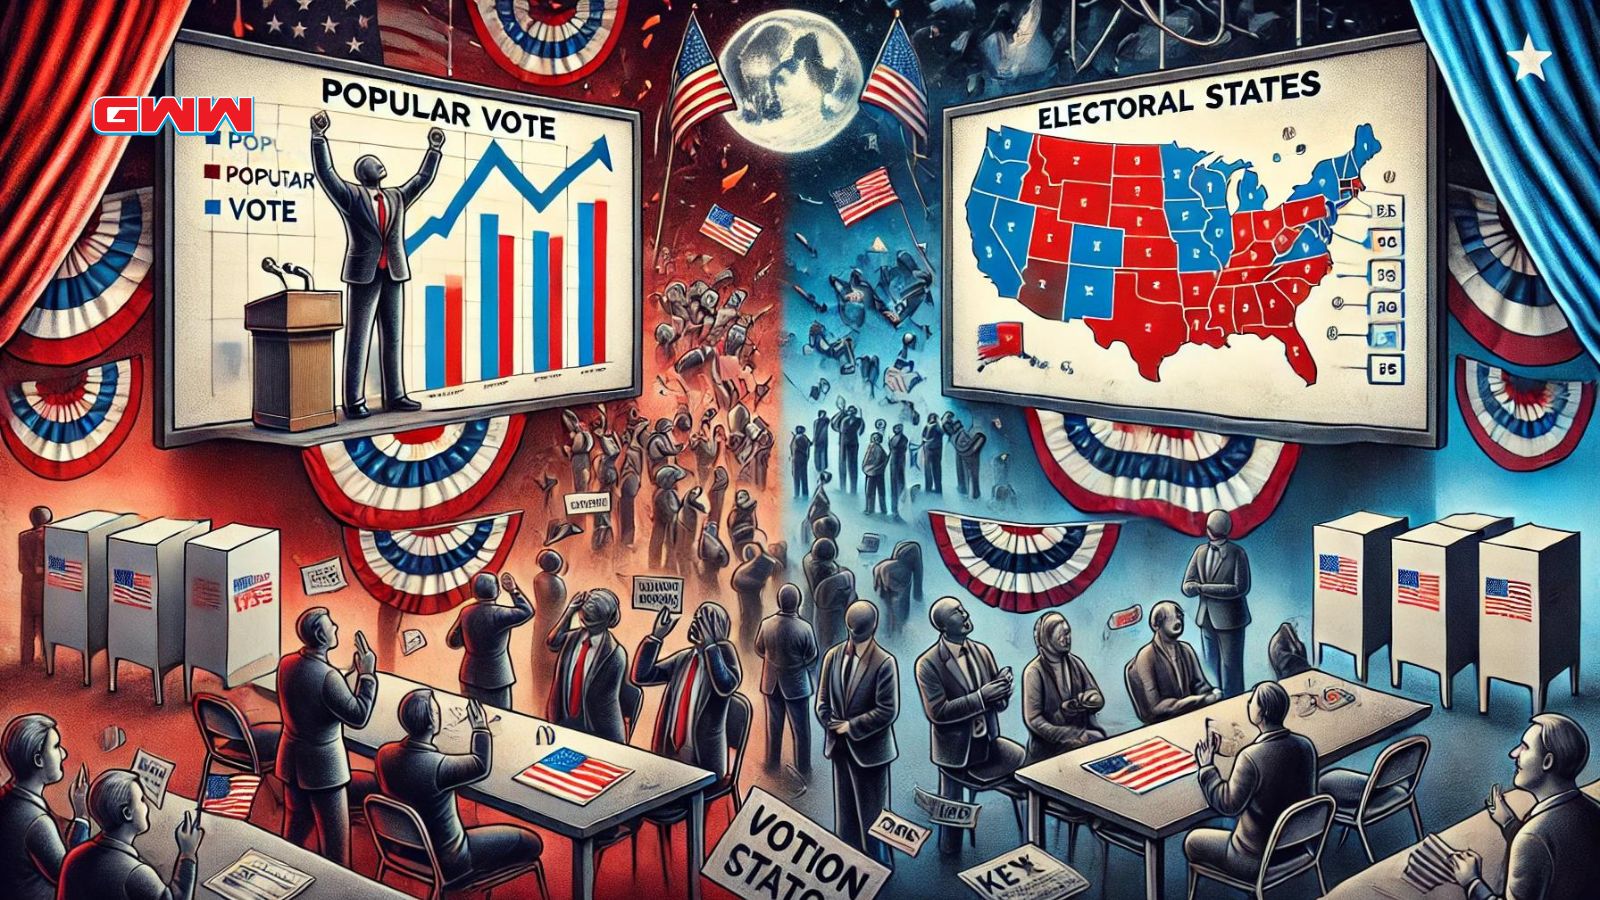 A political scene depicting the predicted outcome of an election